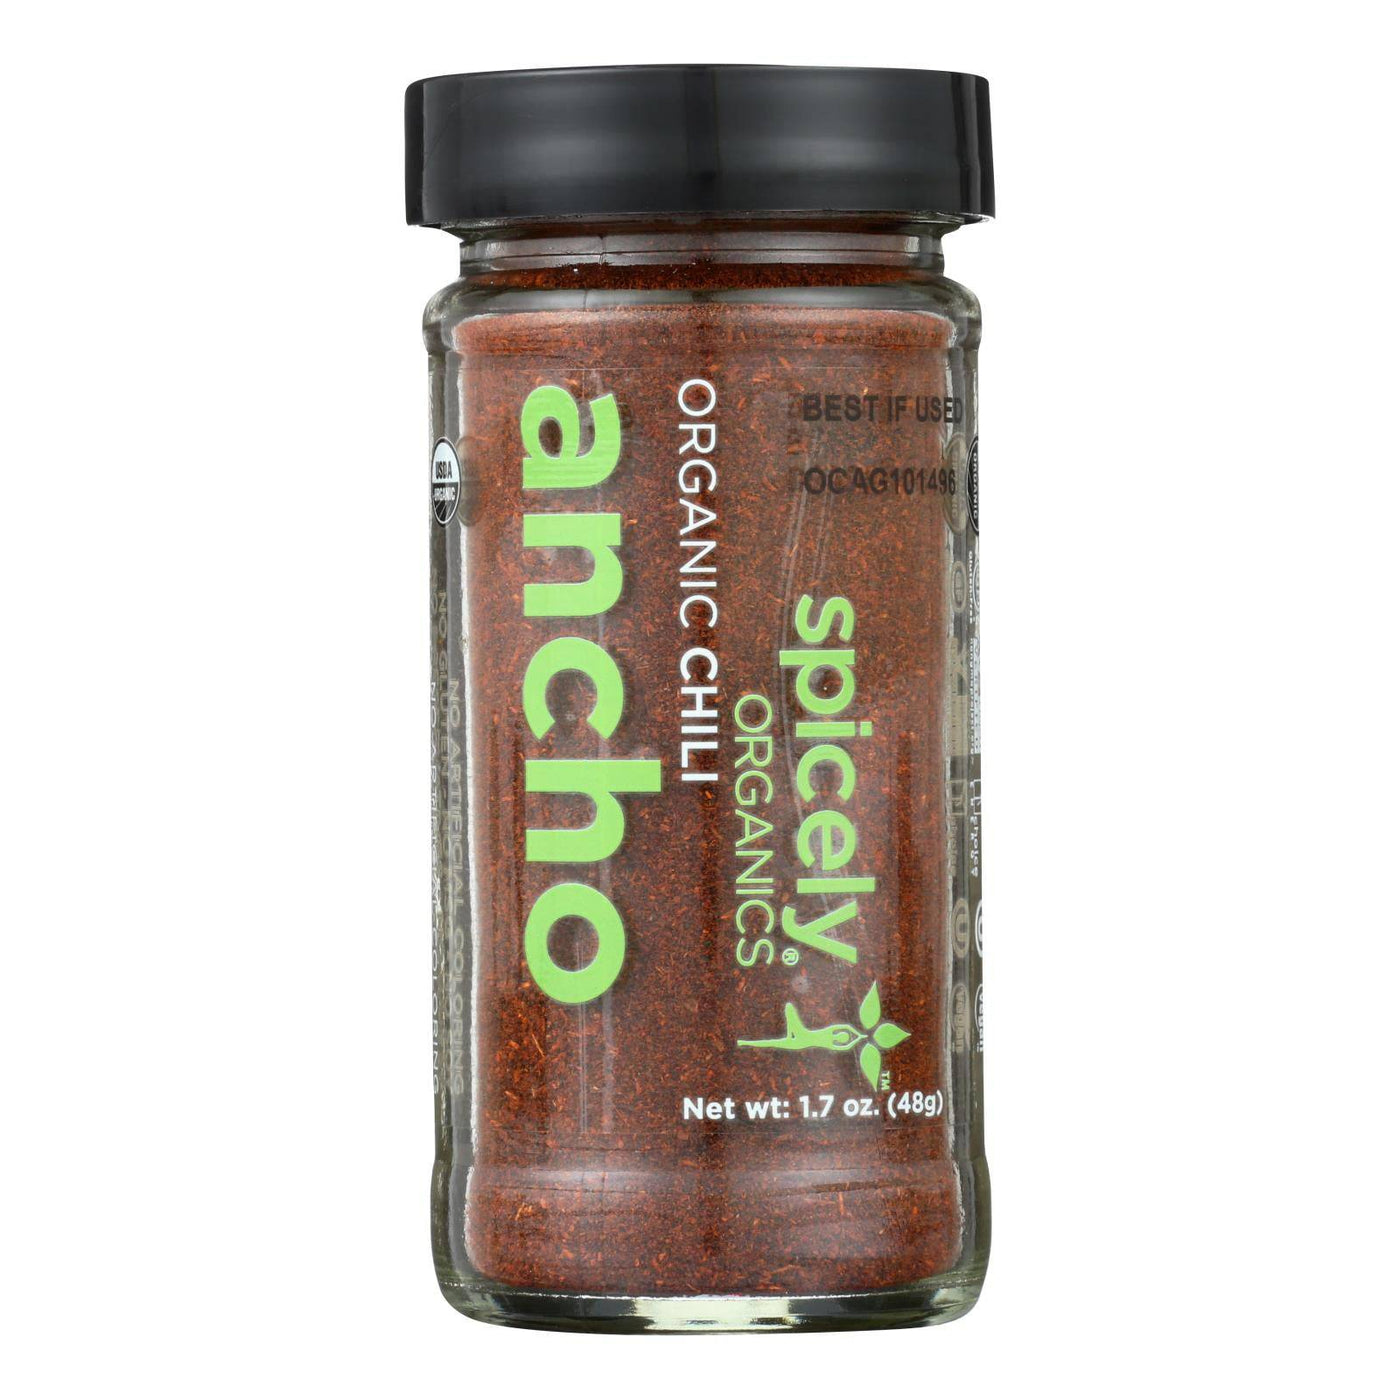 Spicely Organics - Organic Org Chili Ancho Ground - Case Of 3 - 1.7 Oz. | OnlyNaturals.us